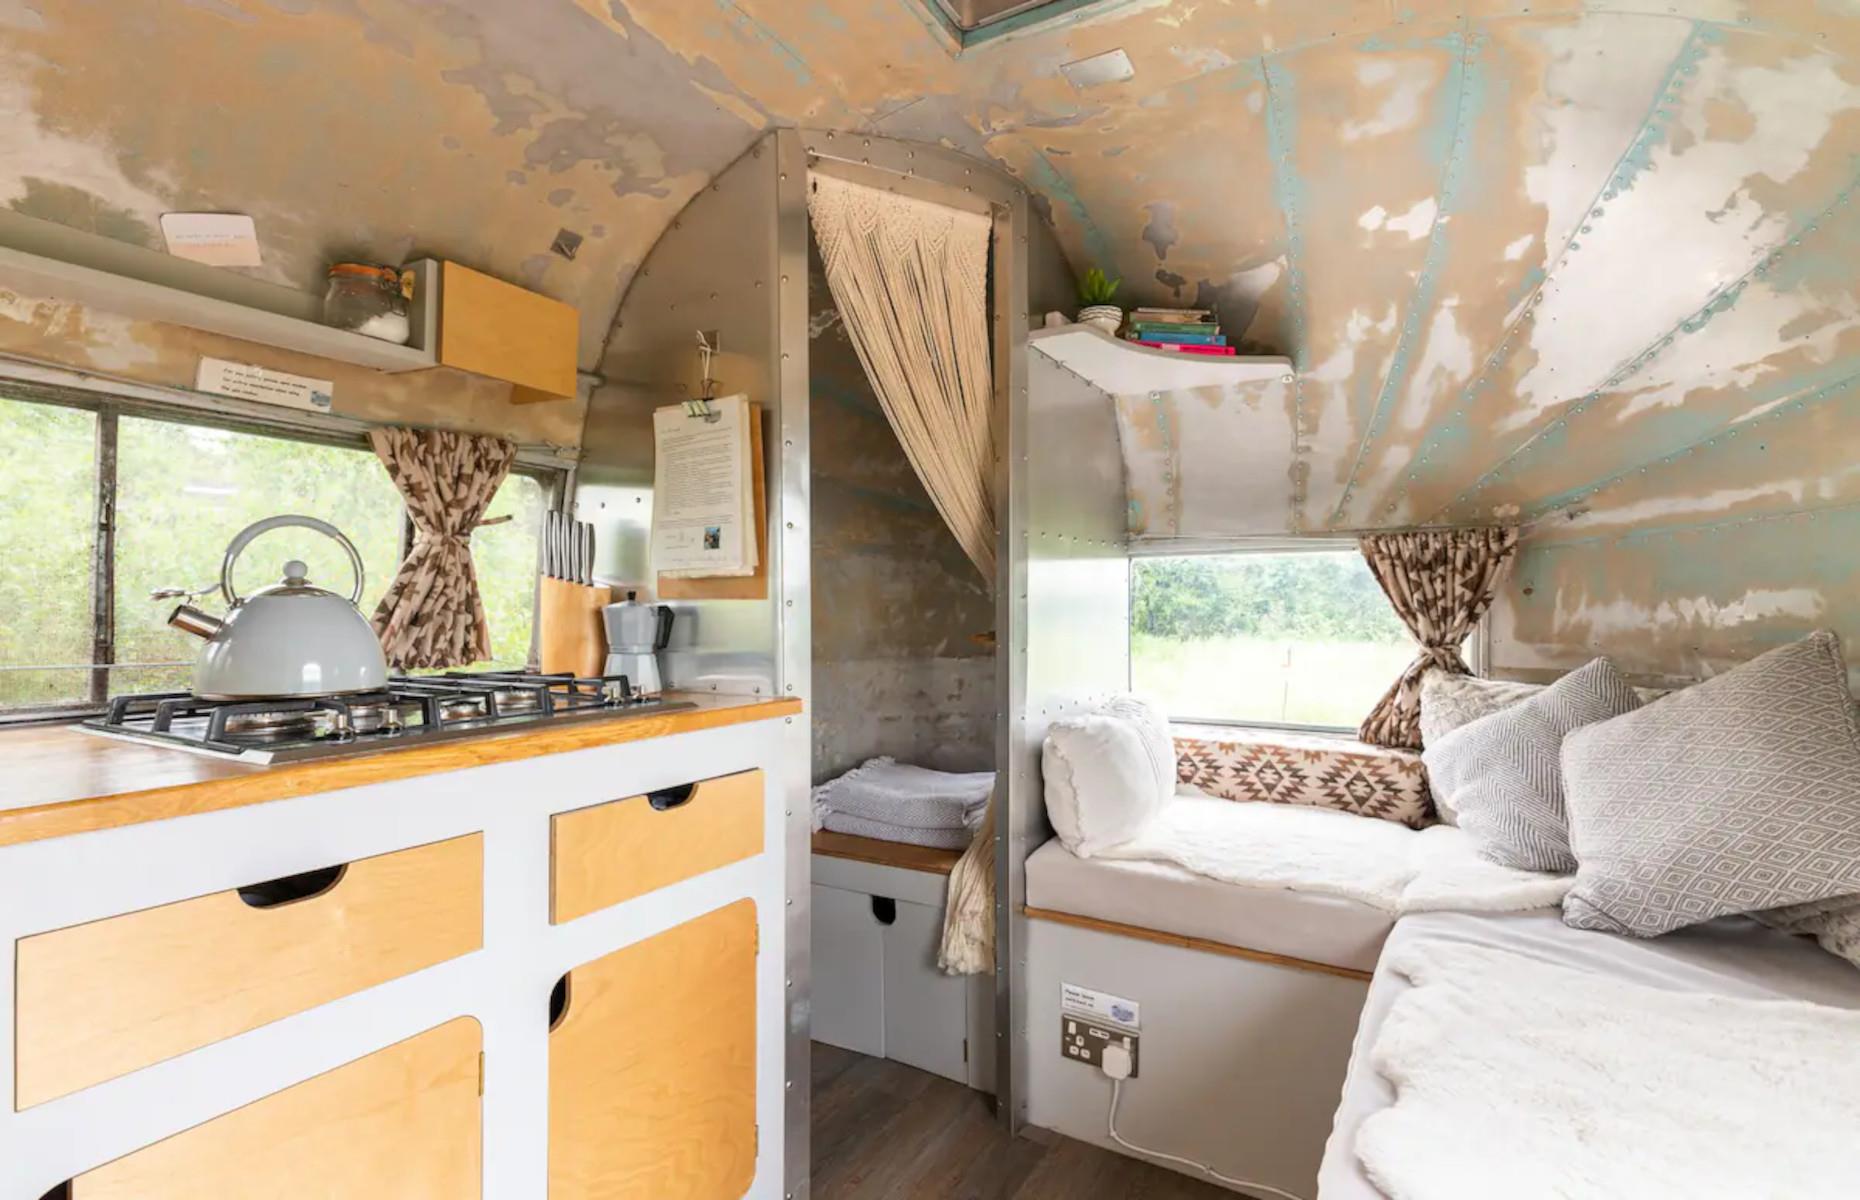 <p>Tucked away in a leafy grotto with its own private meadow in Hereford in the UK, this beautifully restored 1956 Airstream boasts an unusual shabby-chic interior. The rustic exposed roof and vintage yellow cabinetry add a quirky feel to this unique <a href="https://www.airbnb.co.uk/rooms/49959548">Airbnb</a> space.</p>